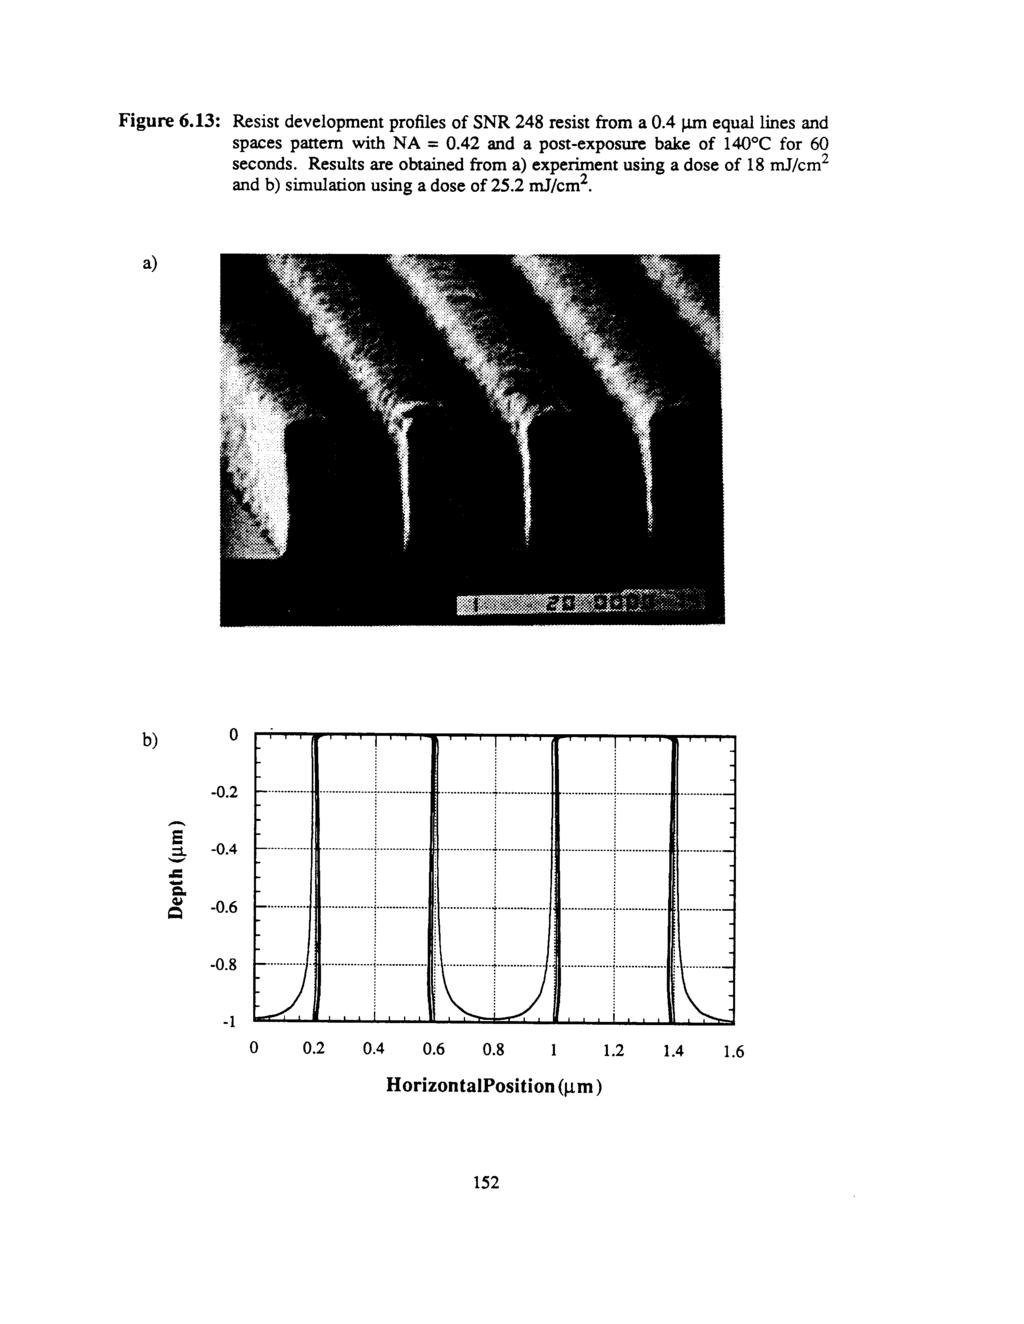 Figure 6.13: Resist development profiles of SNR 248 resist from a 0.4 pm equal lines and spaces pattern with NA = 0.42 and a post-exposure bake of 140 C for 60 seconds.